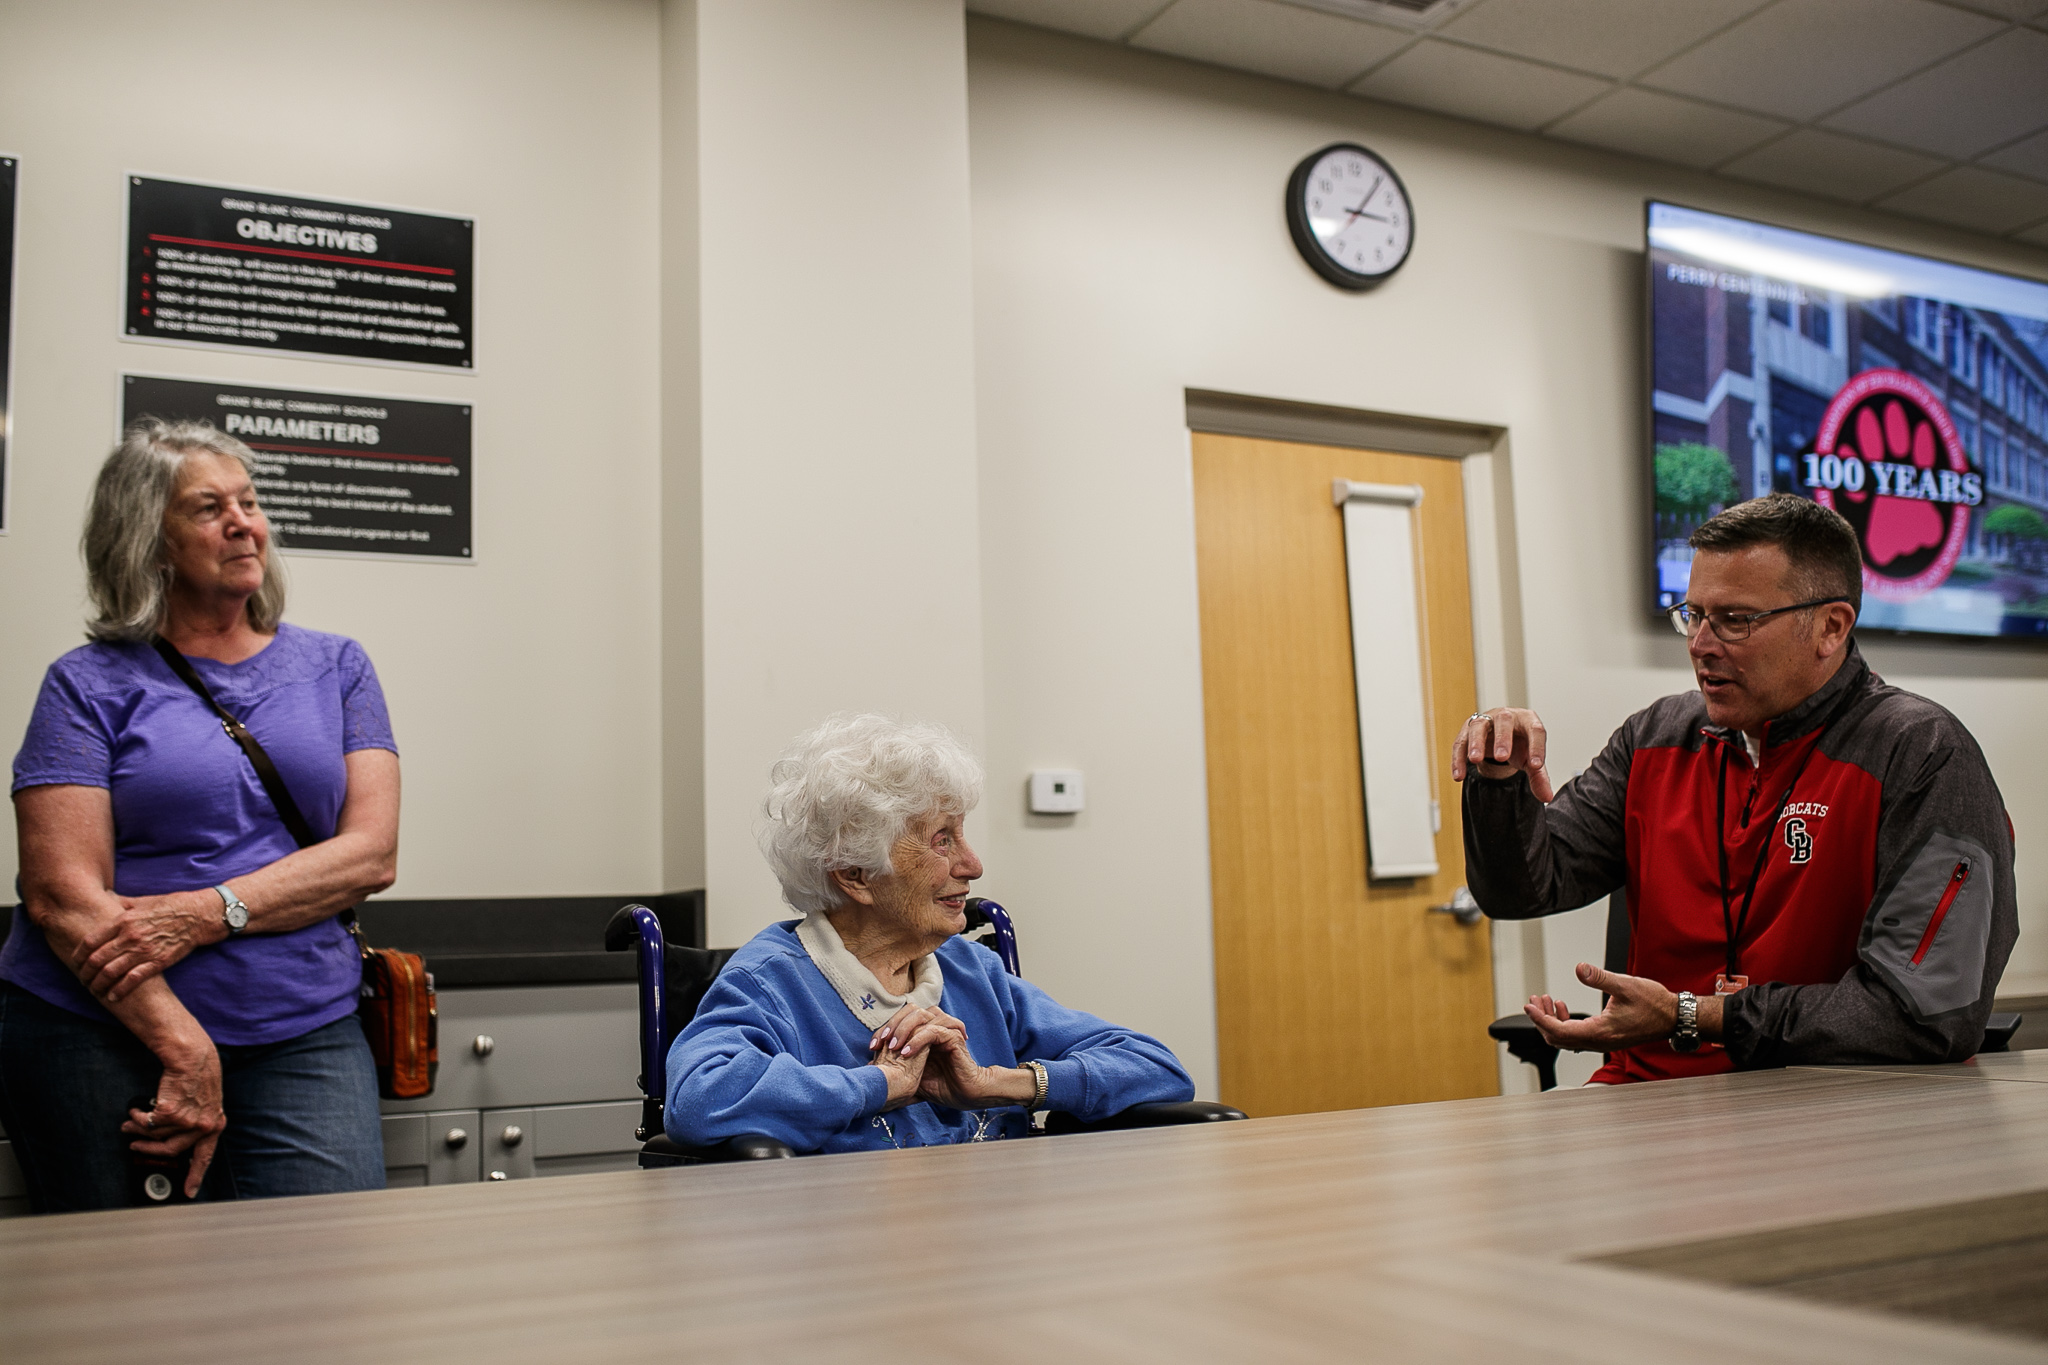 Grand Blanc Schools Superintendent Trevor Alward speaks with oldest living graduate Mary Evatt Gainor during the Perry Center Centennial Event in Grand Blanc on Saturday, May 14, 2022. (Jenifer Veloso | MLive.com)